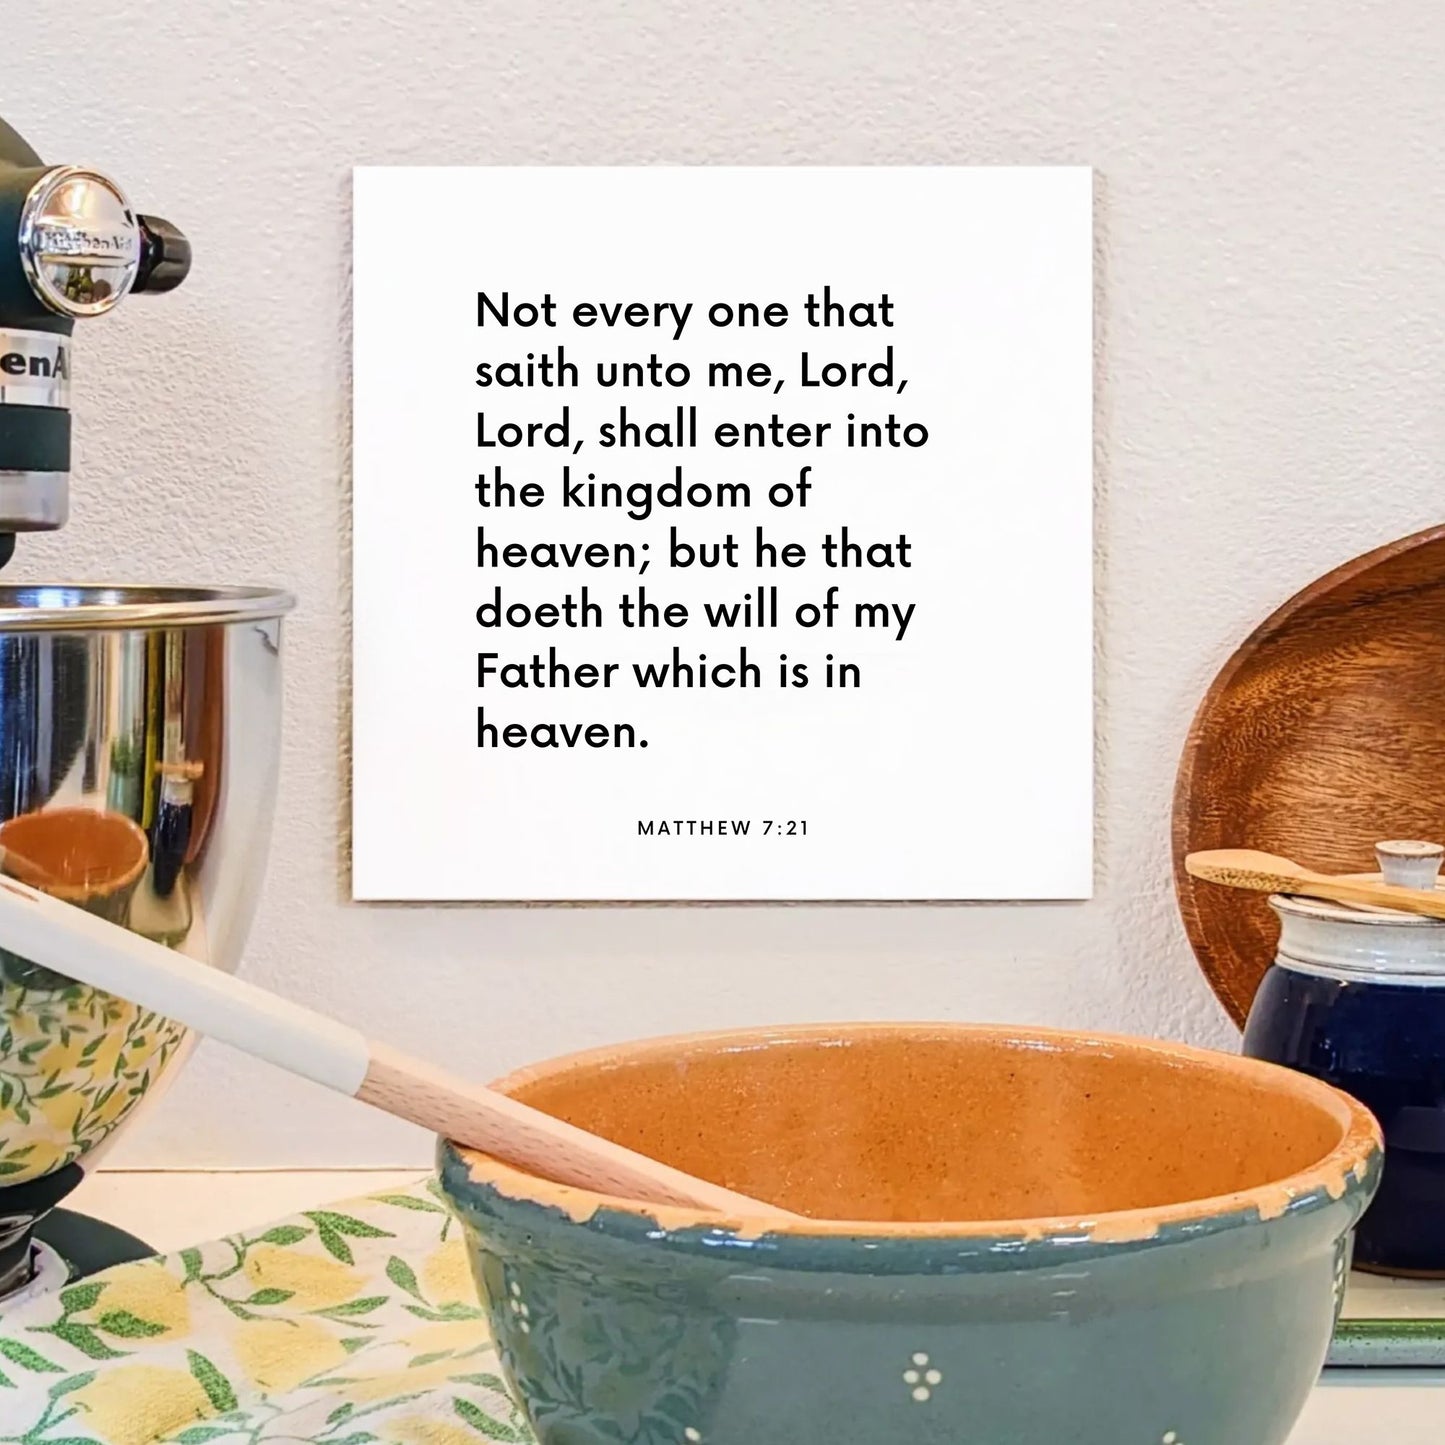 Kitchen mouting of the scripture tile for Matthew 7:21 - "He that doeth the will of my Father which is in heaven"